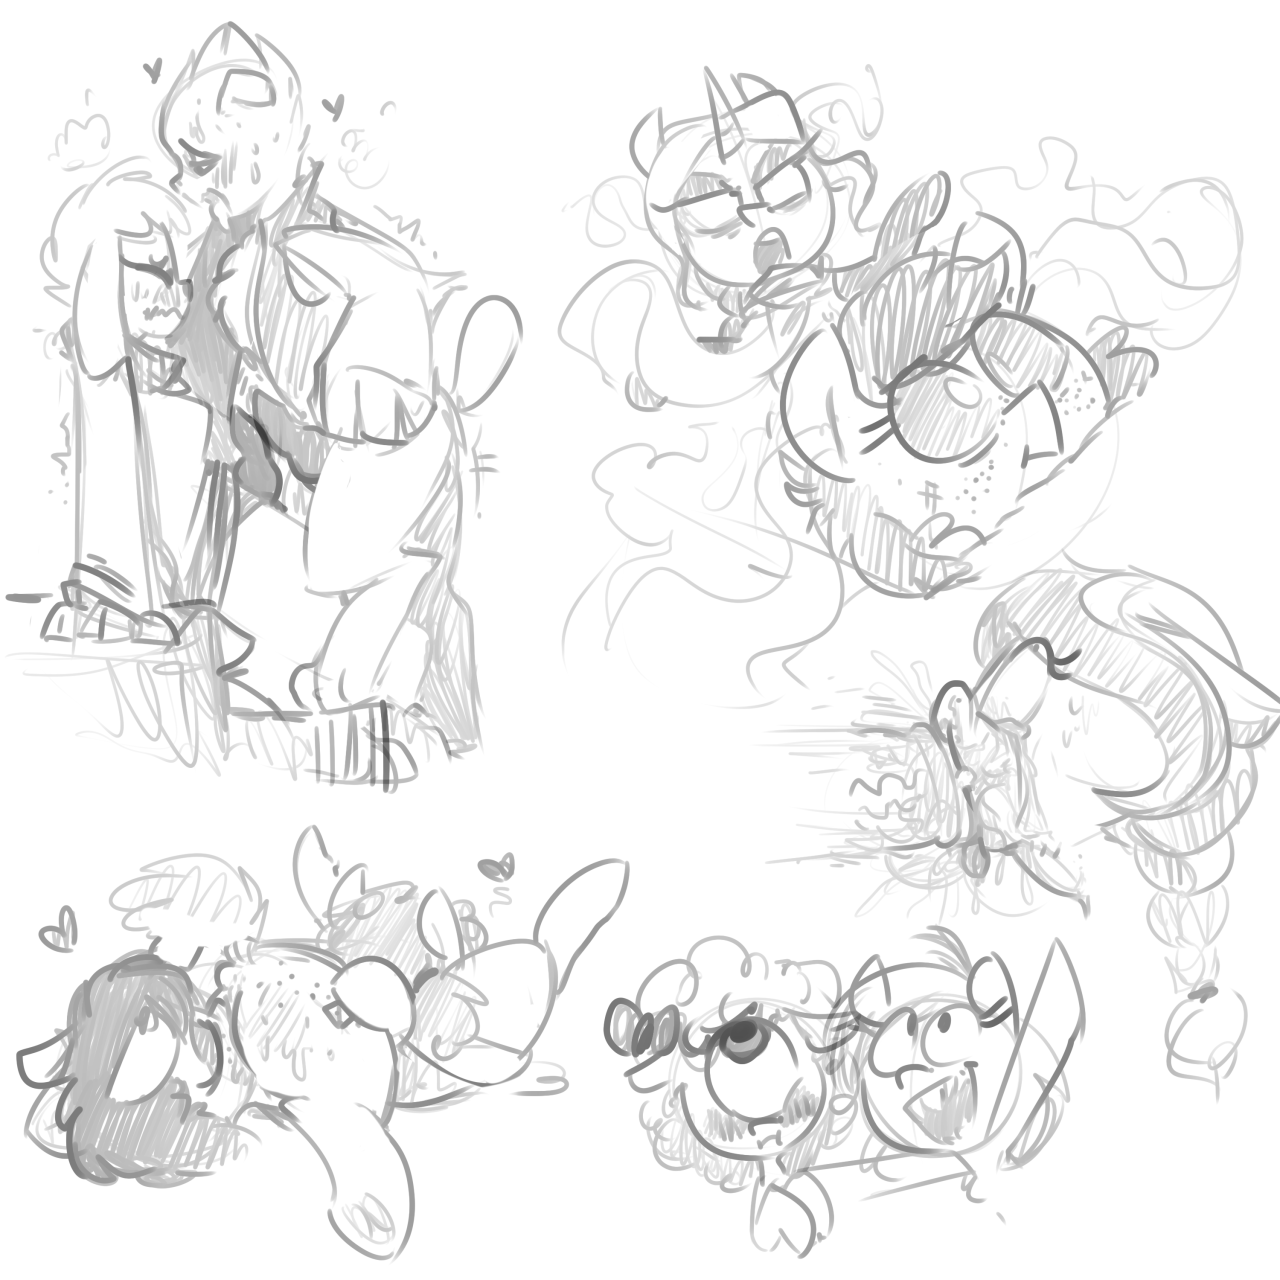 Doodle stream stuffs.Man, you guys shoulda been there